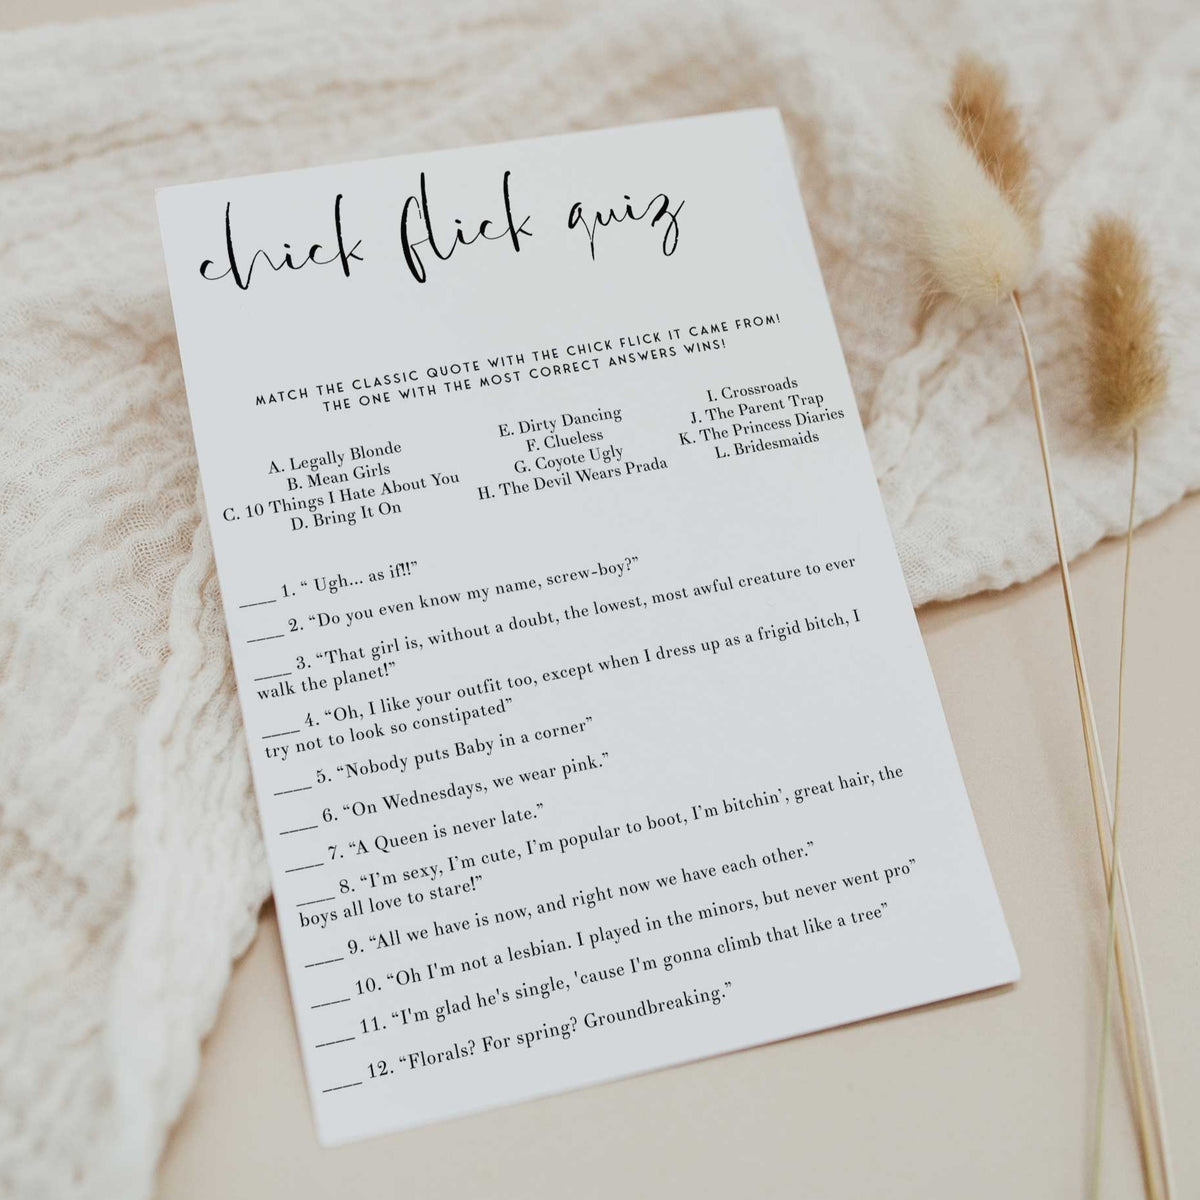 Fully editable and printable bridal shower chick flick quiz game with a modern minimalist design. Perfect for a modern simple bridal shower themed party